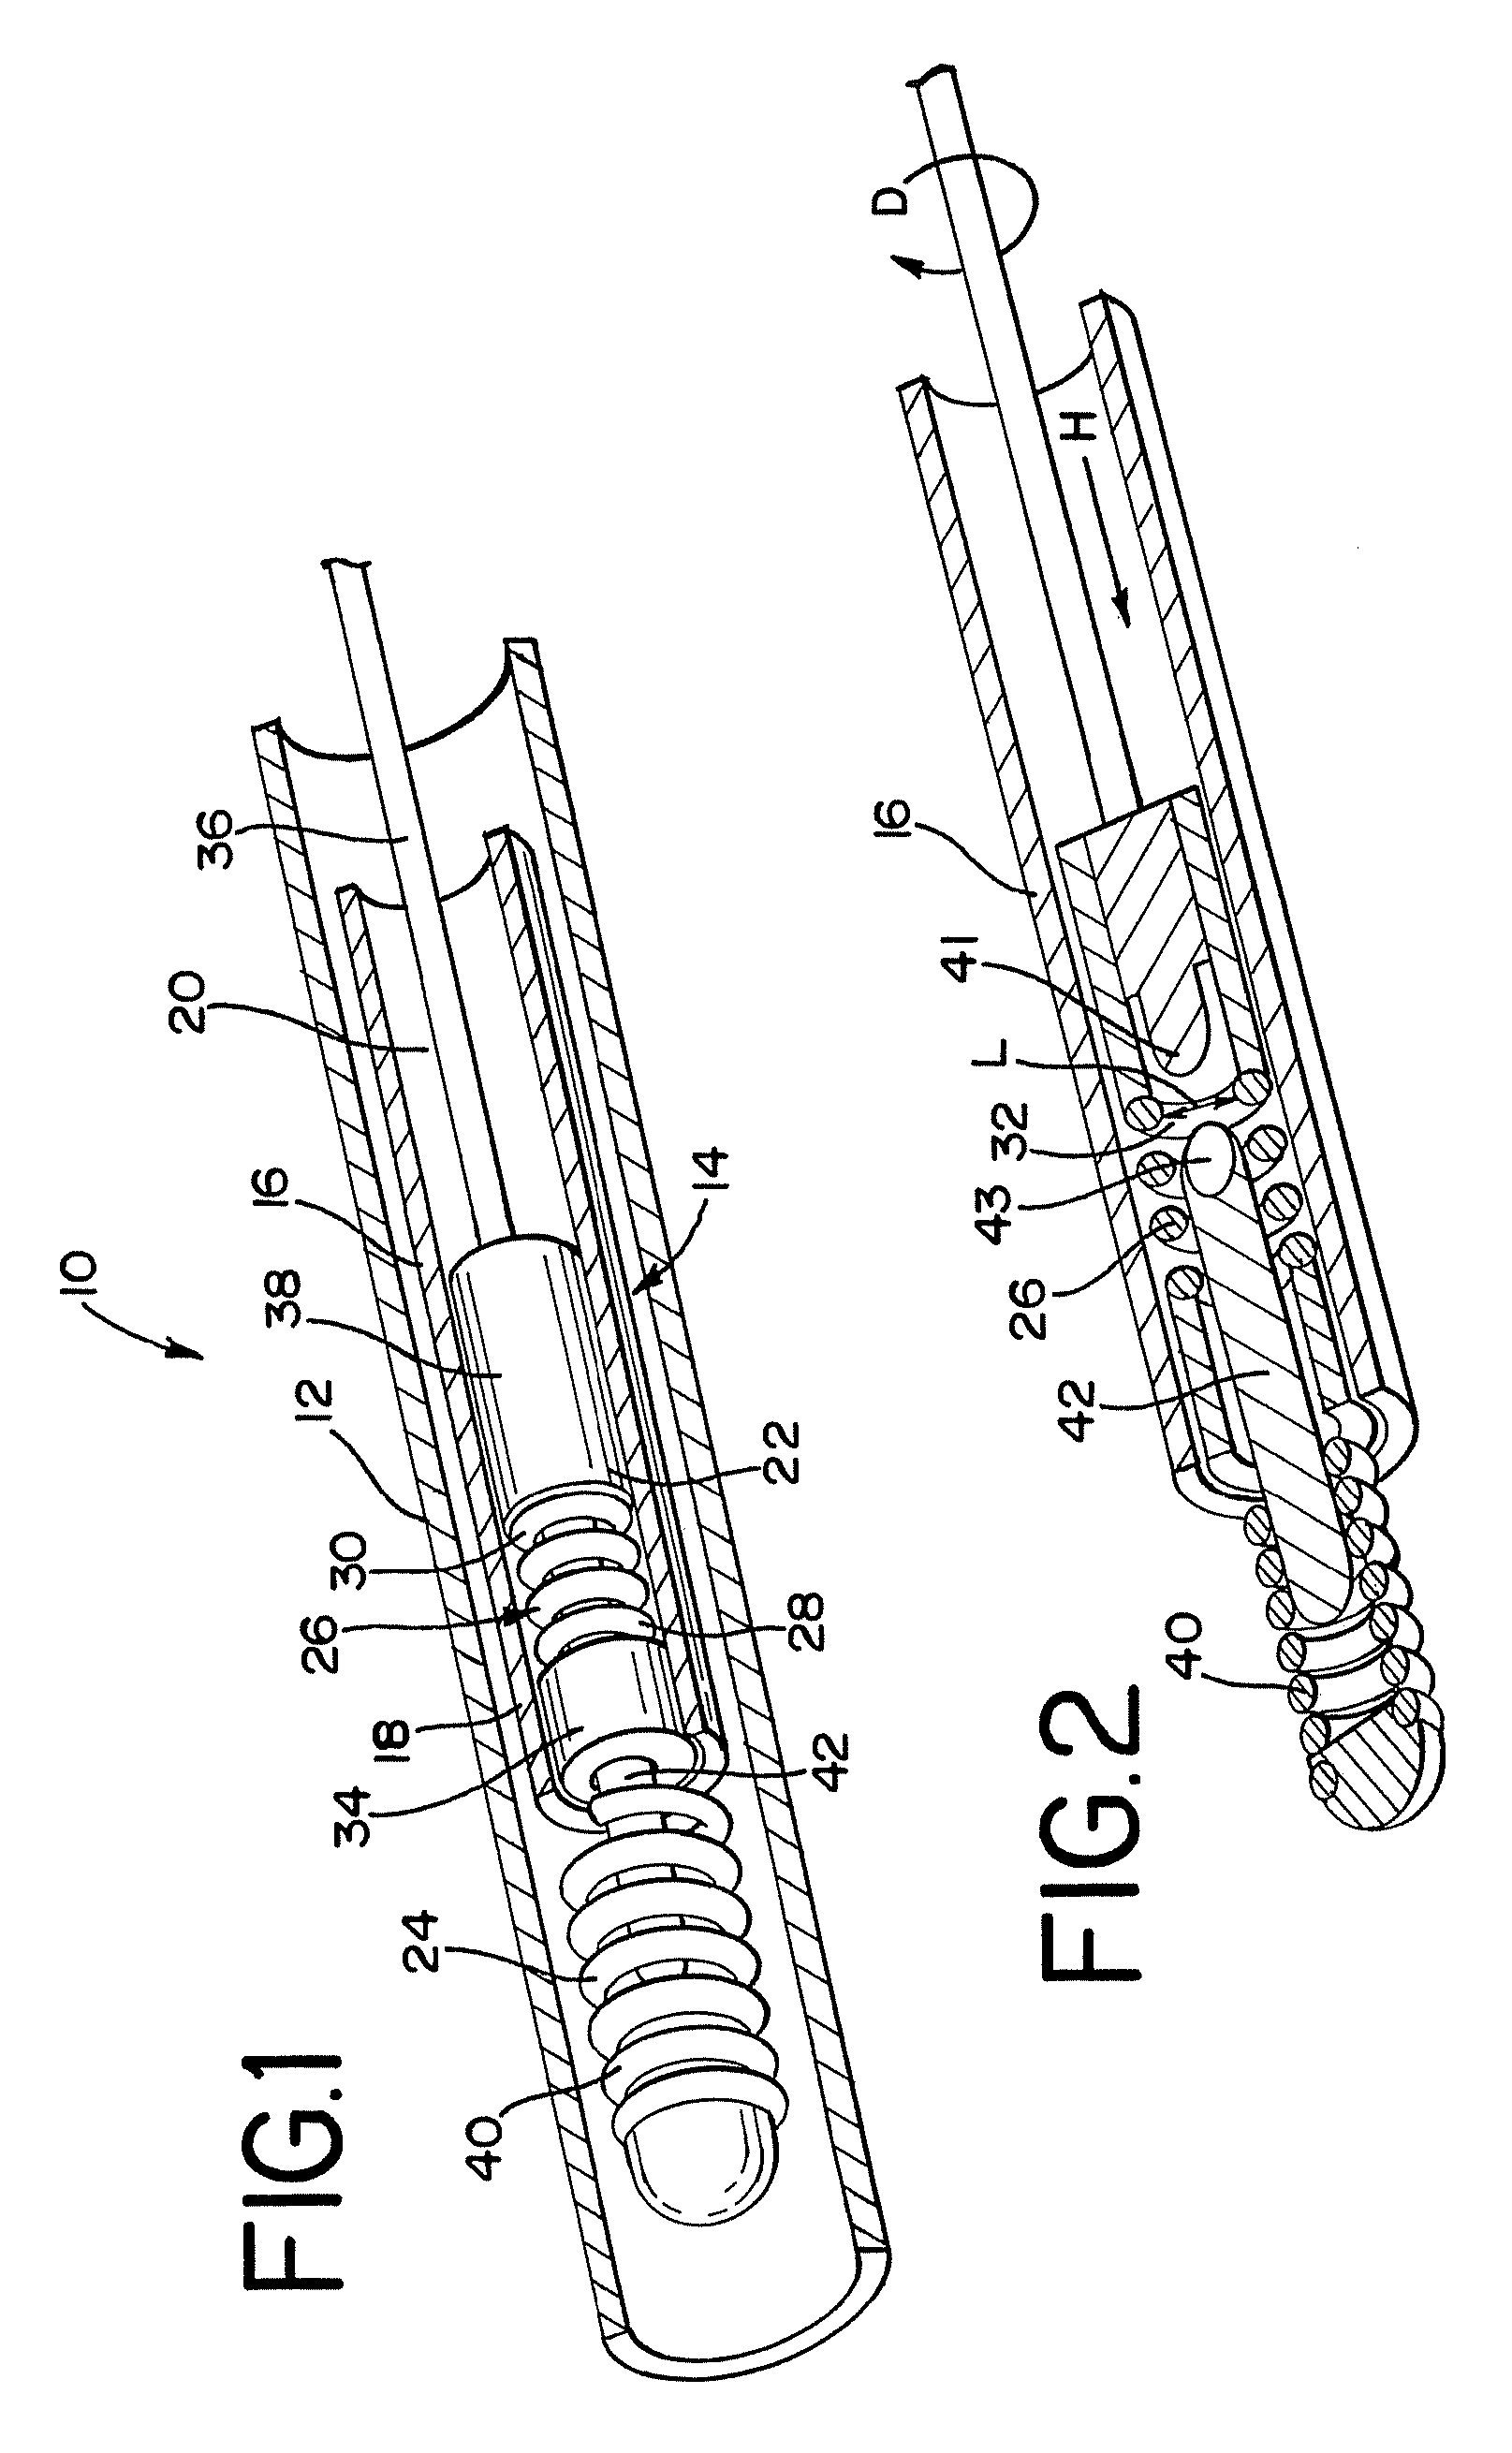 Embolic device delivery system